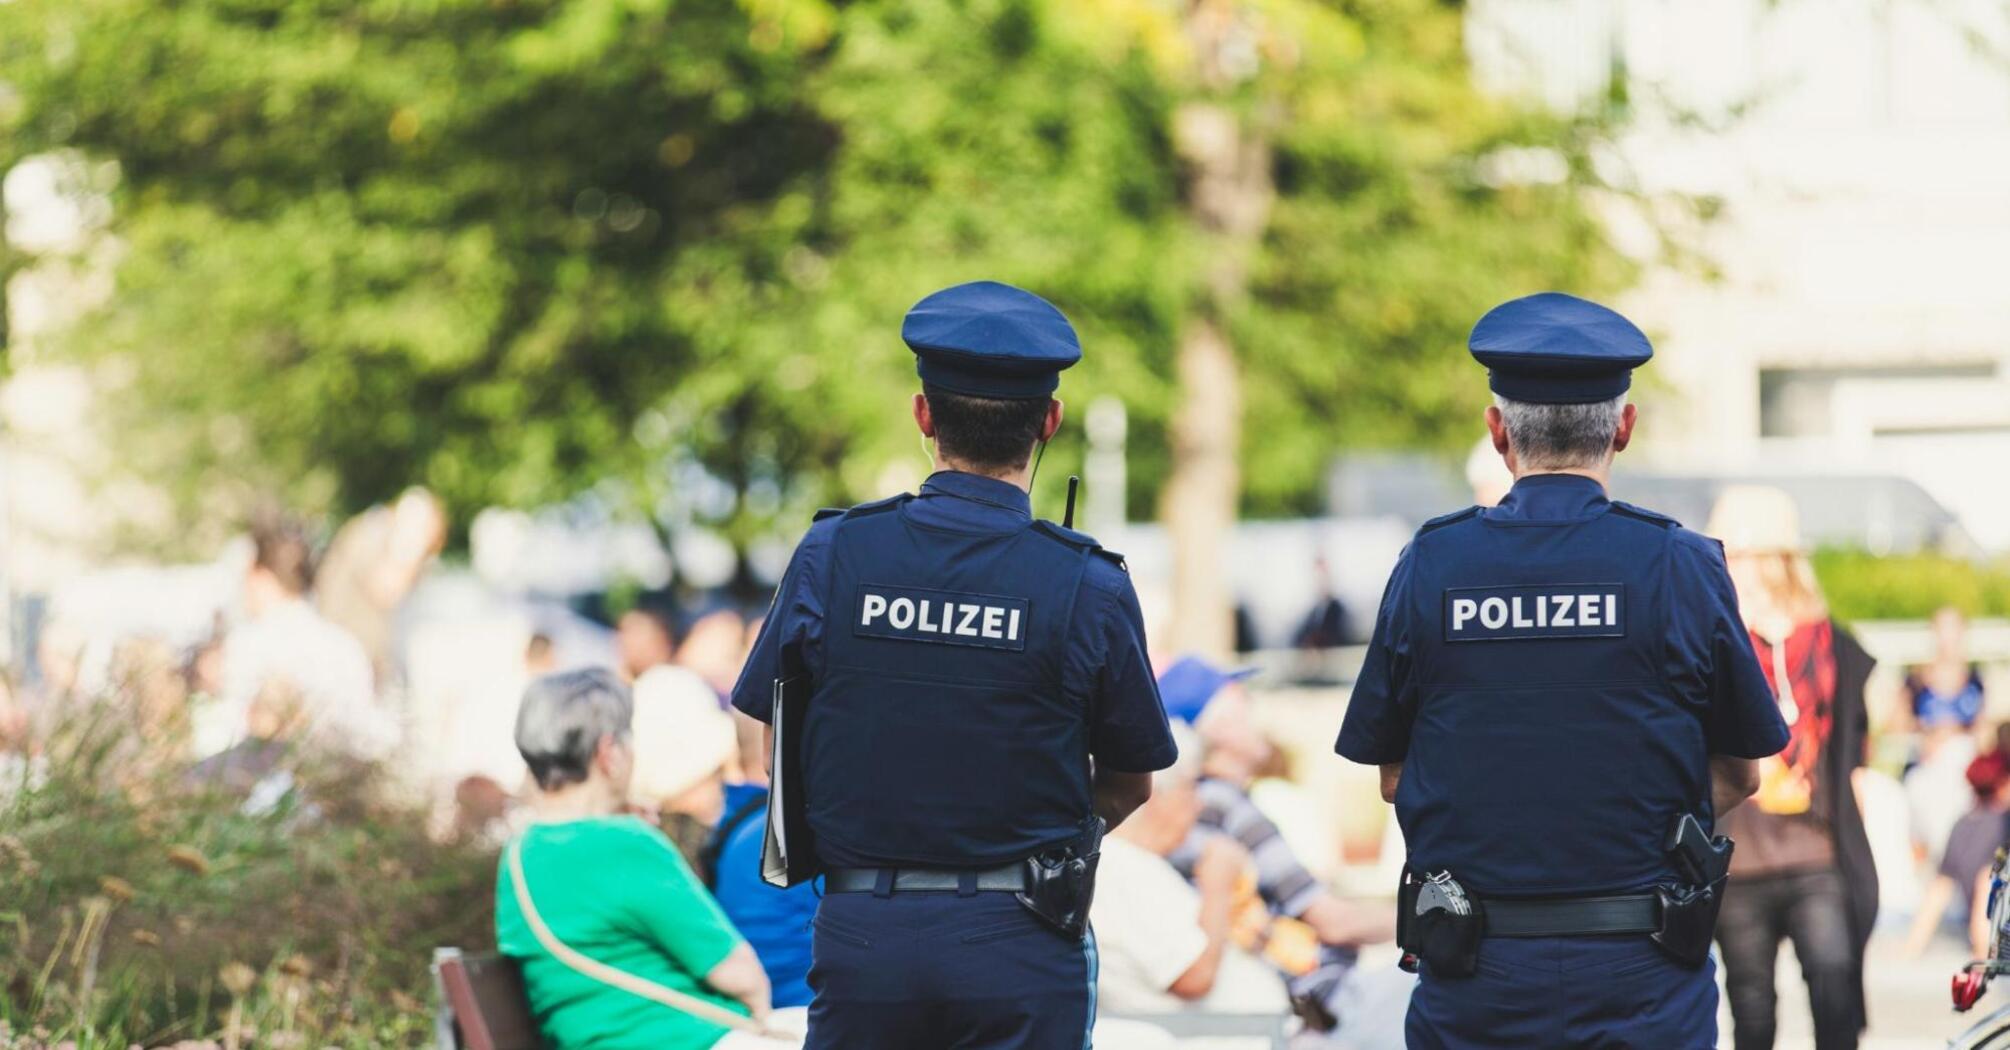 Two policemen stand and watch people